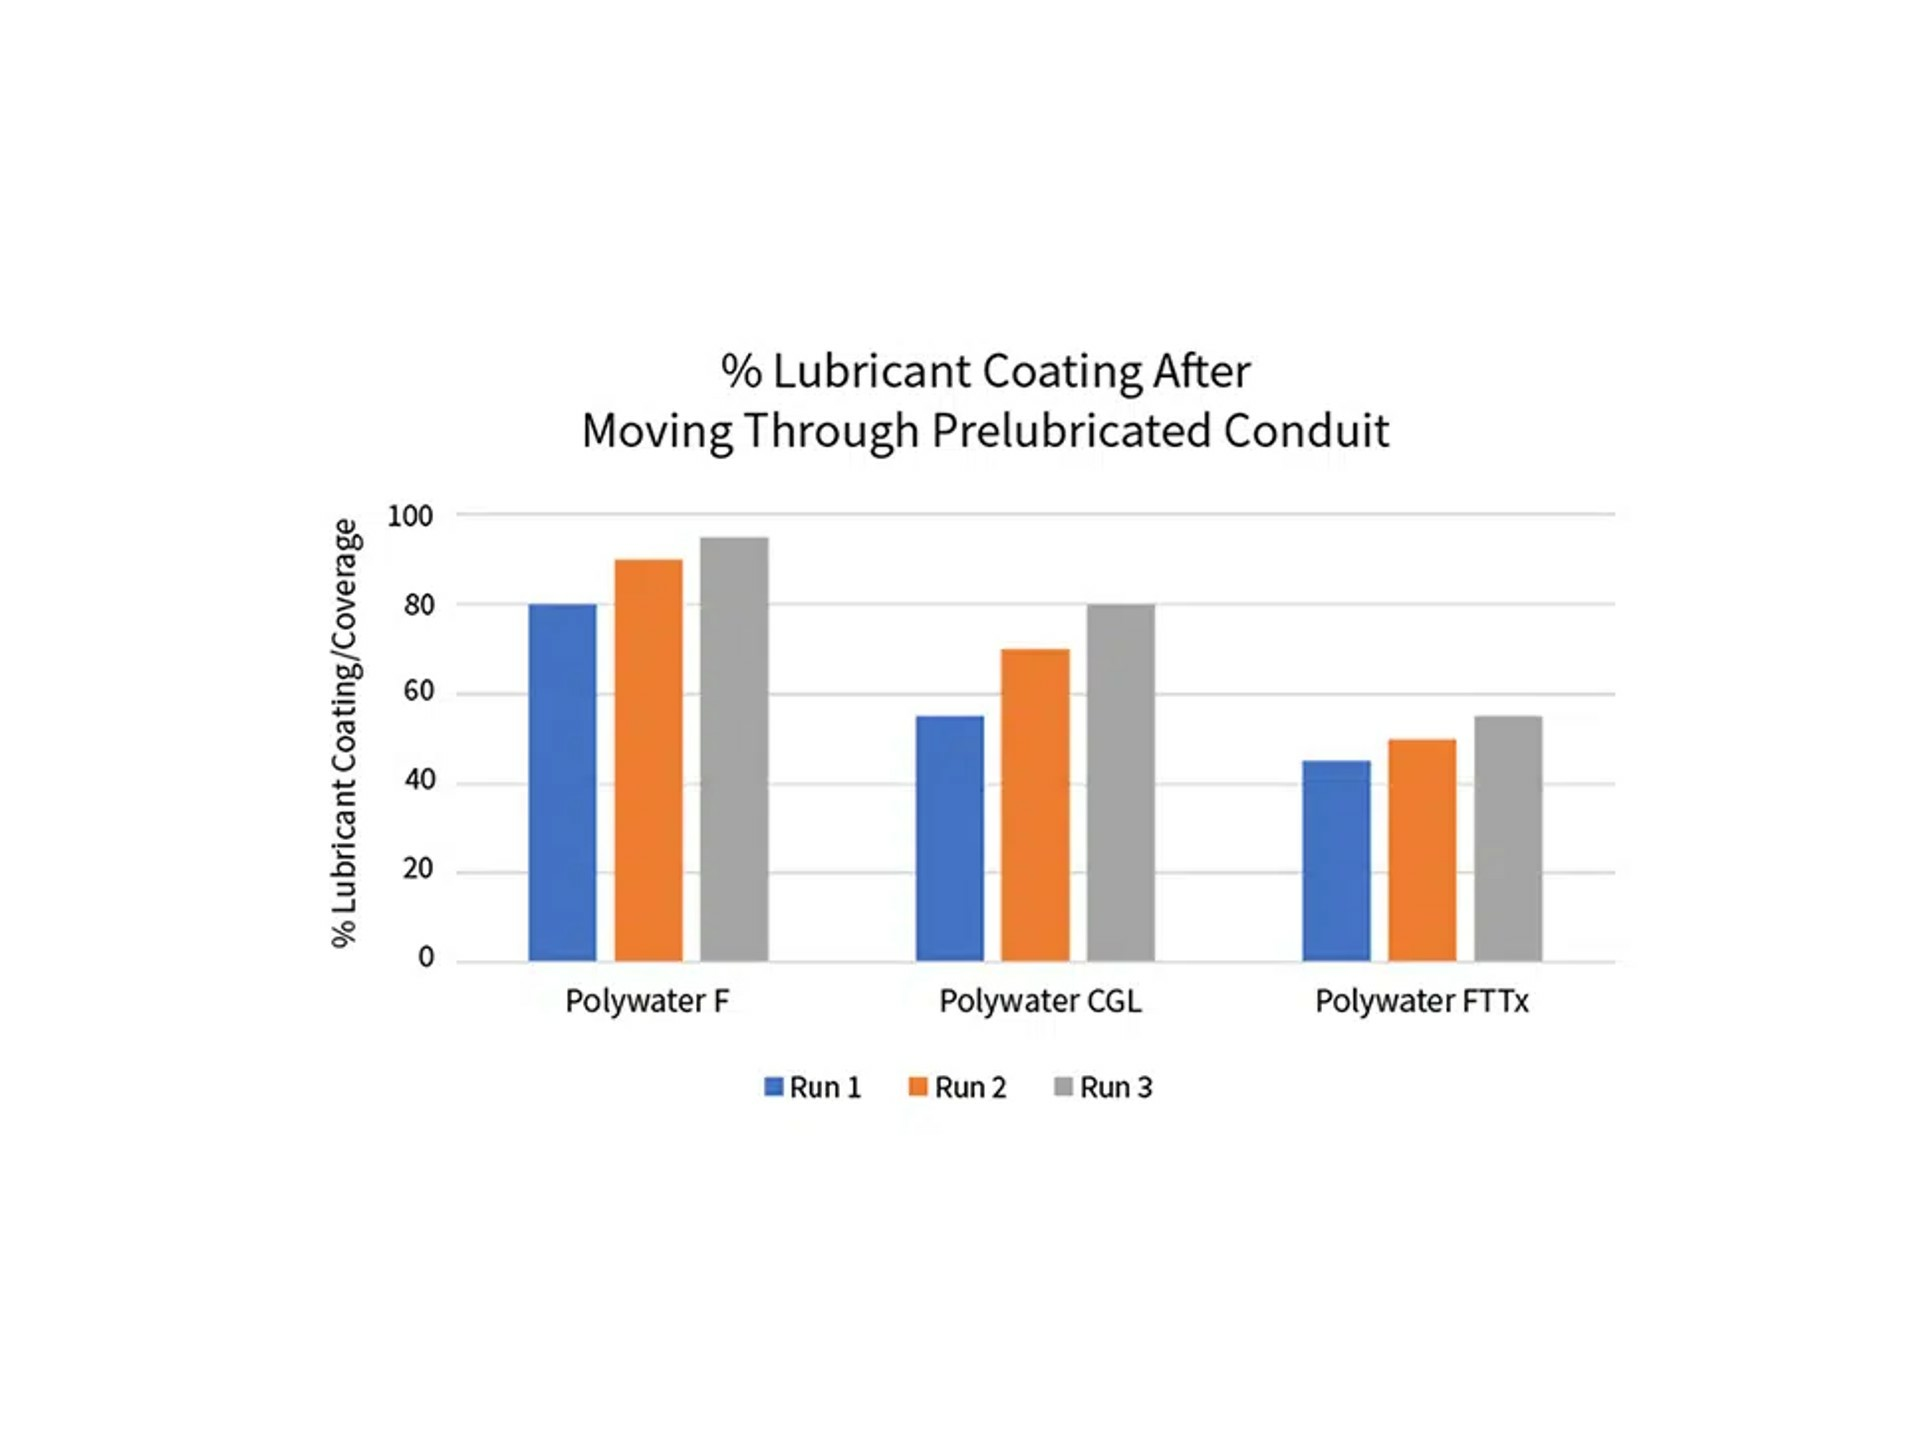 Graph-4-Lubricant-Coating-After-Moving-Through-Prelubricated-Conduit.